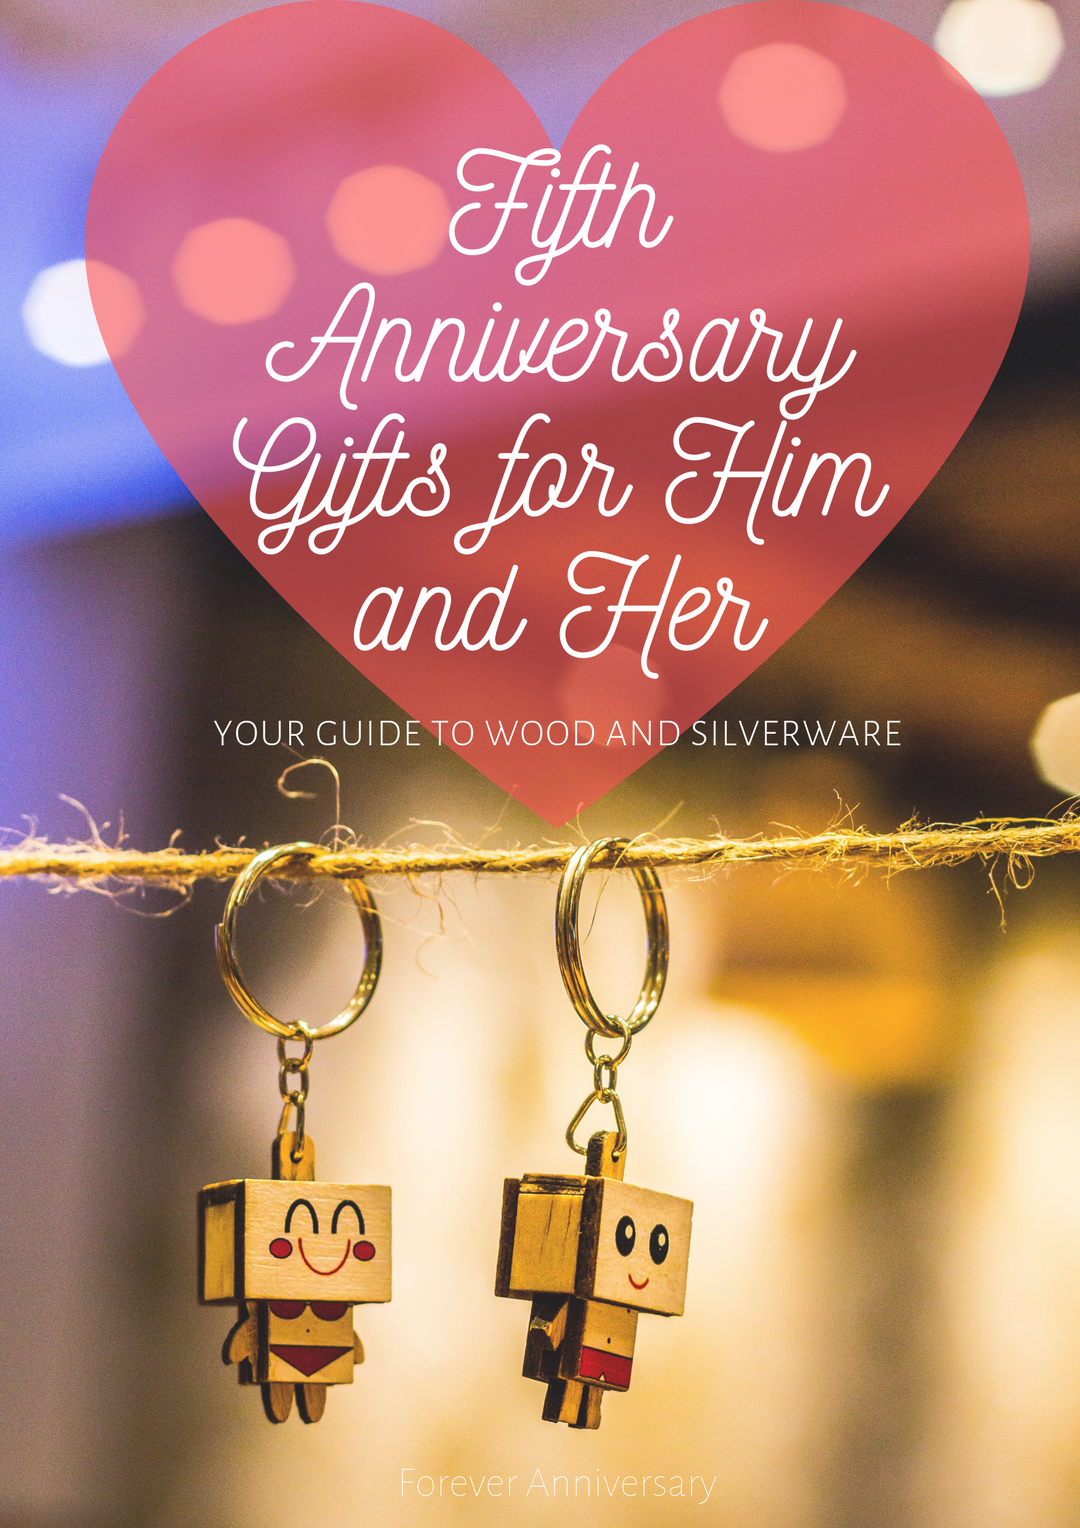 5th Anniversary Gifts for Him and Her